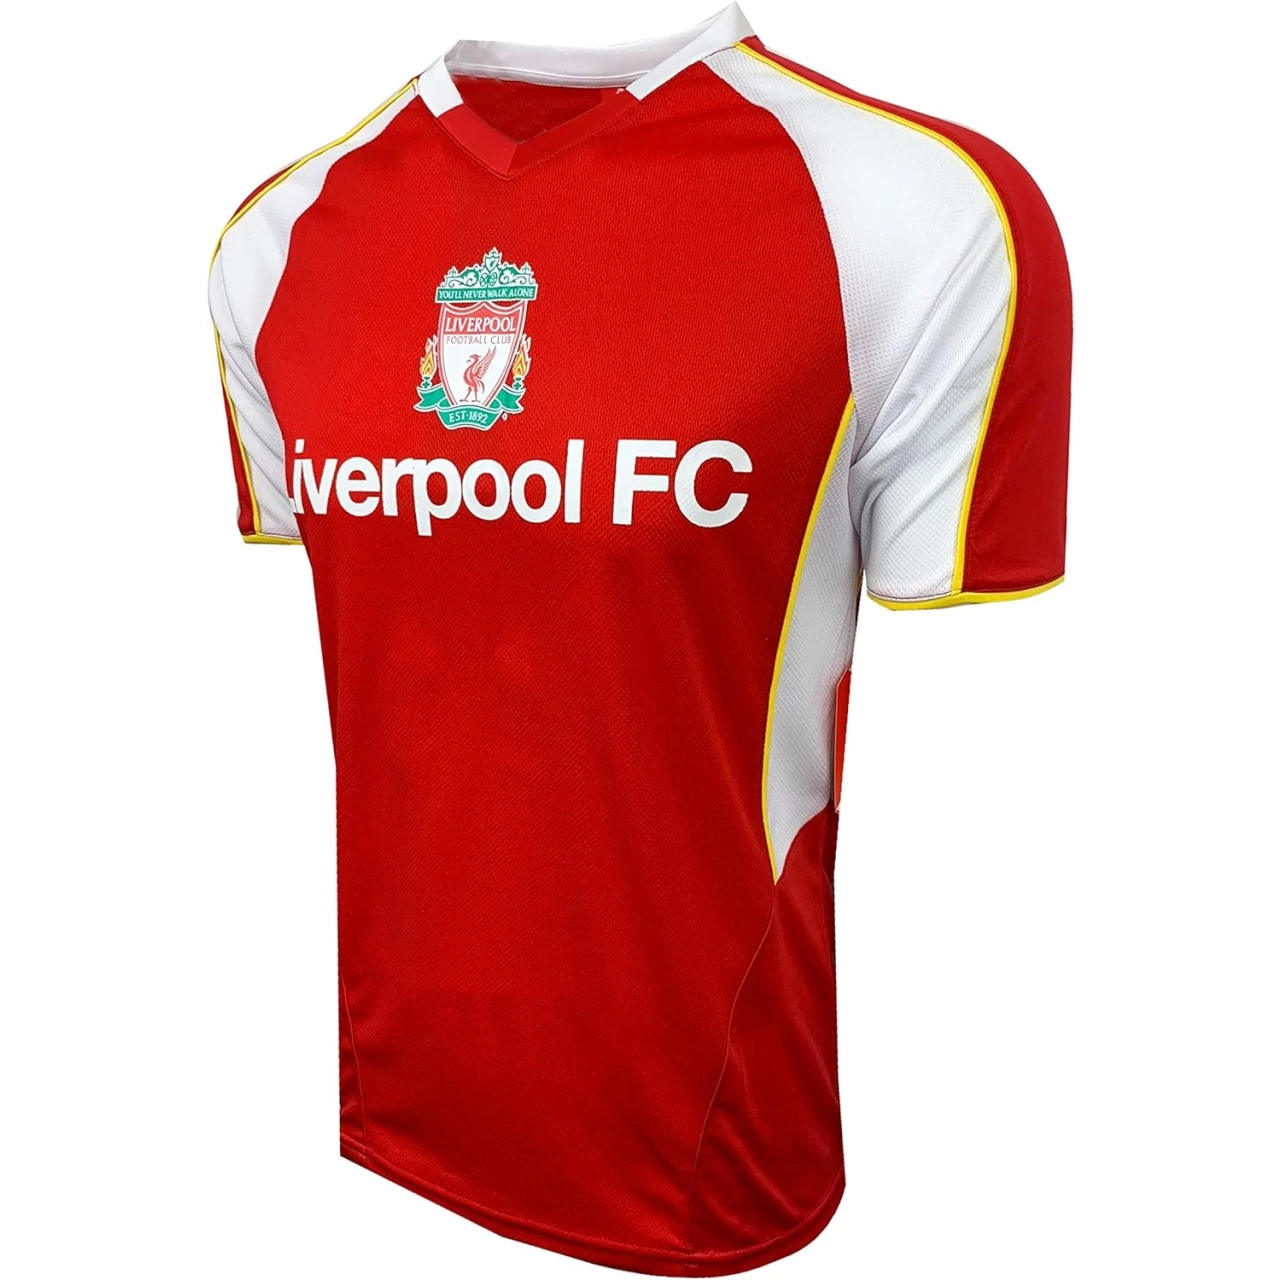 Youth Liverpool Training Jersey, Red Color, Licensed Boy&rsquo;s Liverpool Shirt